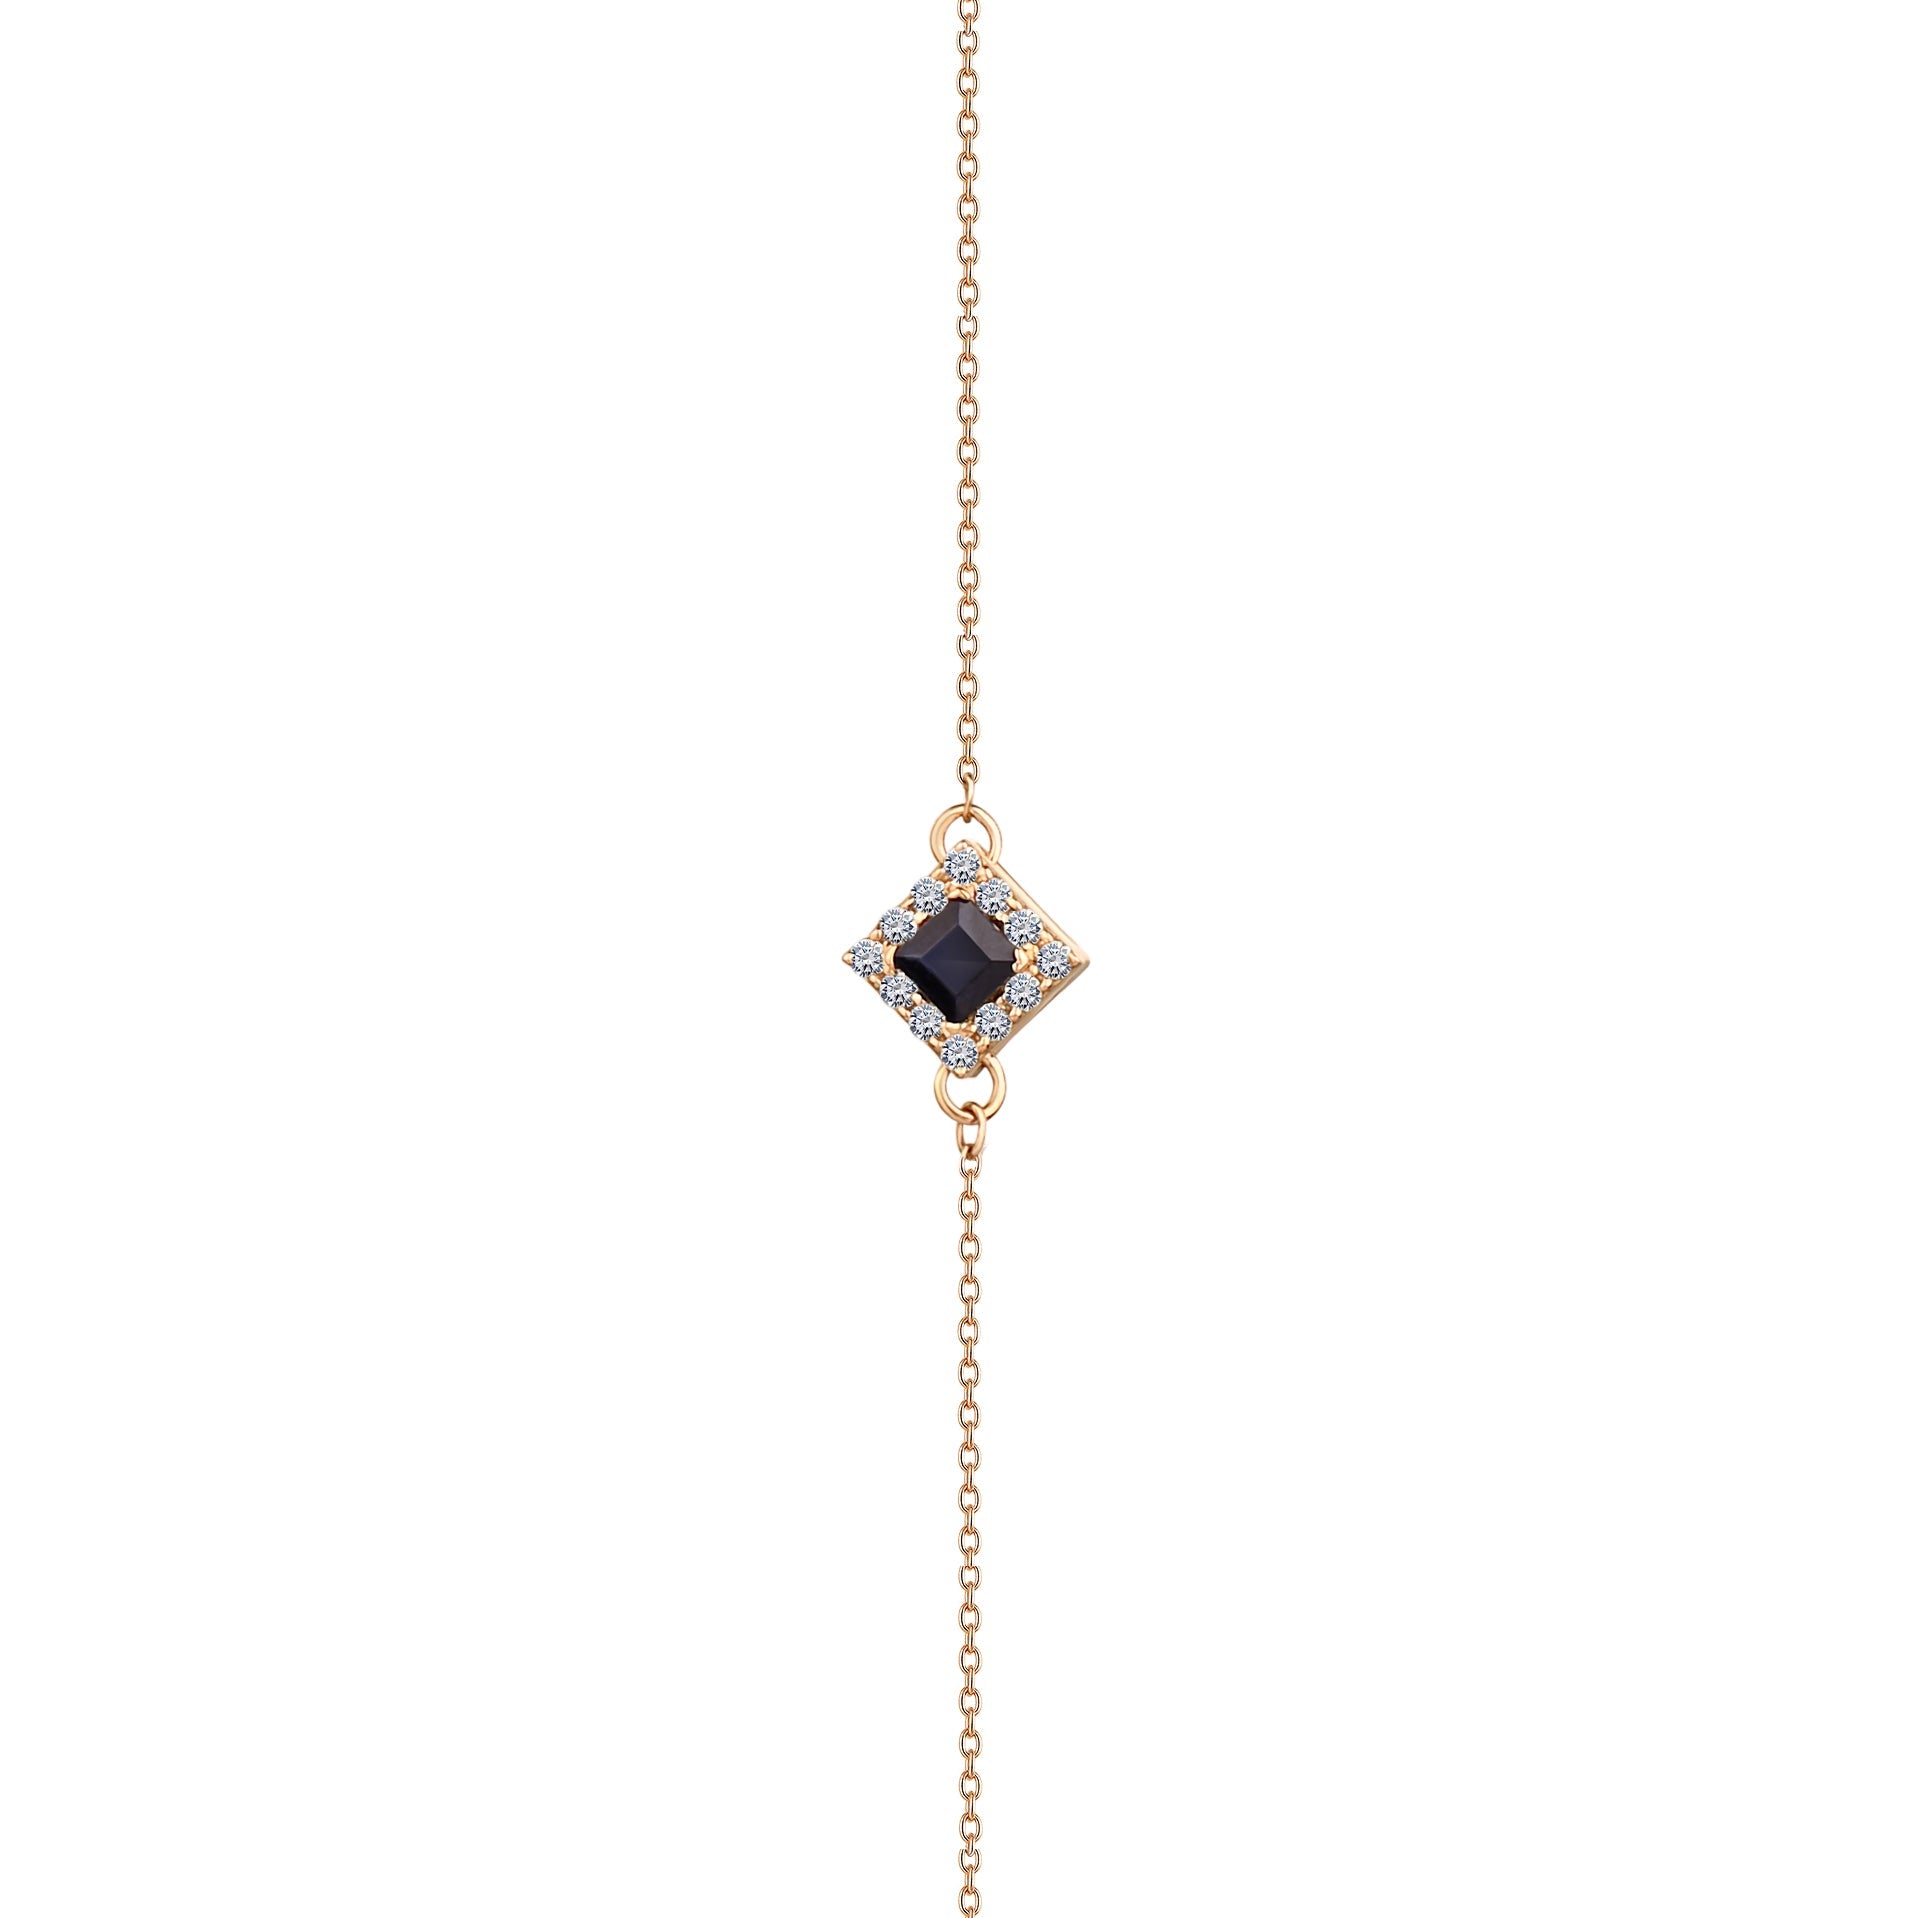 Central Sapphire with Diamond Bracelet in Yellow 18 K Gold - S-B187SON